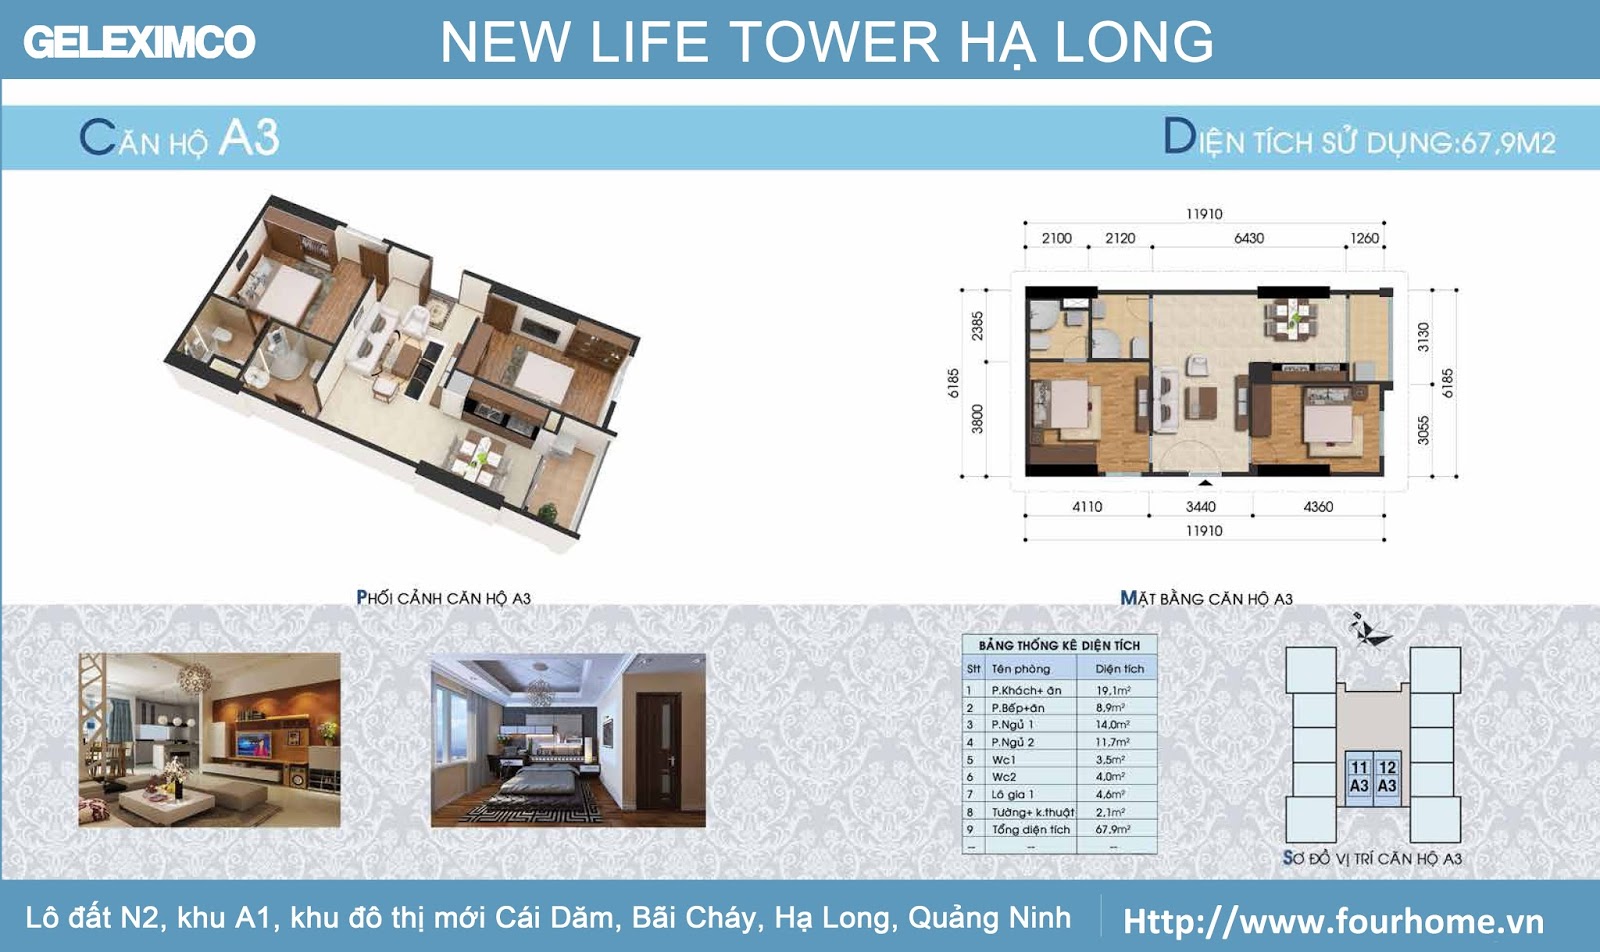 New Life Tower Hạ Long